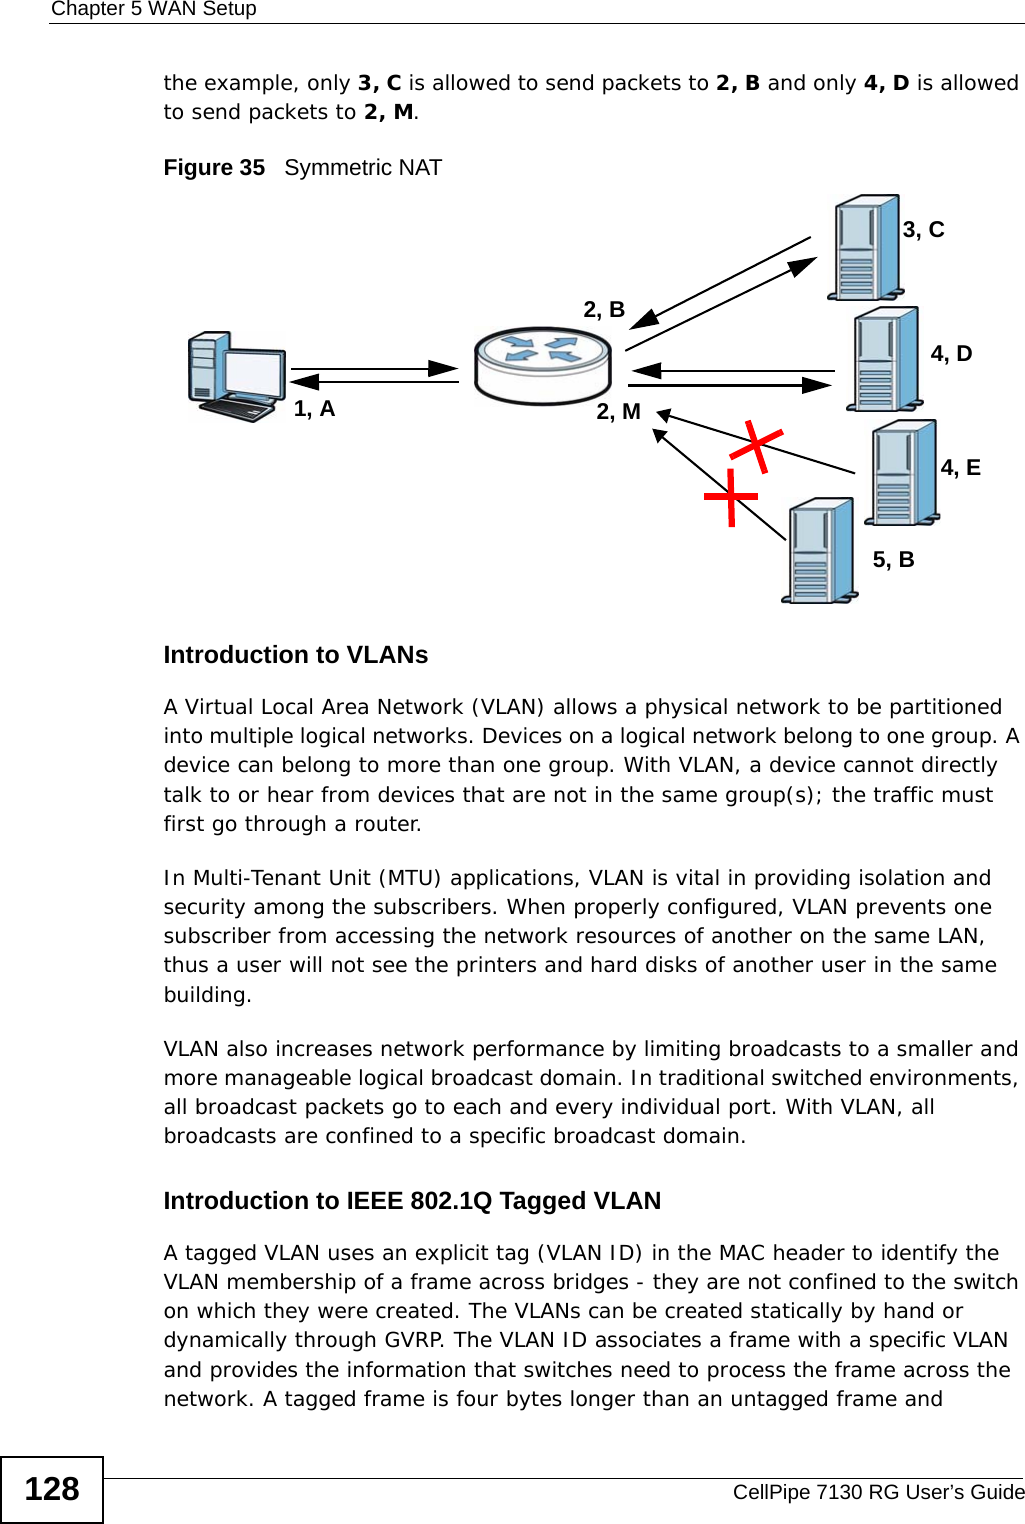 Chapter 5 WAN SetupCellPipe 7130 RG User’s Guide128the example, only 3, C is allowed to send packets to 2, B and only 4, D is allowed to send packets to 2, M.Figure 35   Symmetric NATIntroduction to VLANs A Virtual Local Area Network (VLAN) allows a physical network to be partitioned into multiple logical networks. Devices on a logical network belong to one group. A device can belong to more than one group. With VLAN, a device cannot directly talk to or hear from devices that are not in the same group(s); the traffic must first go through a router.In Multi-Tenant Unit (MTU) applications, VLAN is vital in providing isolation and security among the subscribers. When properly configured, VLAN prevents one subscriber from accessing the network resources of another on the same LAN, thus a user will not see the printers and hard disks of another user in the same building. VLAN also increases network performance by limiting broadcasts to a smaller and more manageable logical broadcast domain. In traditional switched environments, all broadcast packets go to each and every individual port. With VLAN, all broadcasts are confined to a specific broadcast domain. Introduction to IEEE 802.1Q Tagged VLAN A tagged VLAN uses an explicit tag (VLAN ID) in the MAC header to identify the VLAN membership of a frame across bridges - they are not confined to the switch on which they were created. The VLANs can be created statically by hand or dynamically through GVRP. The VLAN ID associates a frame with a specific VLAN and provides the information that switches need to process the frame across the network. A tagged frame is four bytes longer than an untagged frame and 1, A 2, M2, B4, D4, E3, C5, B